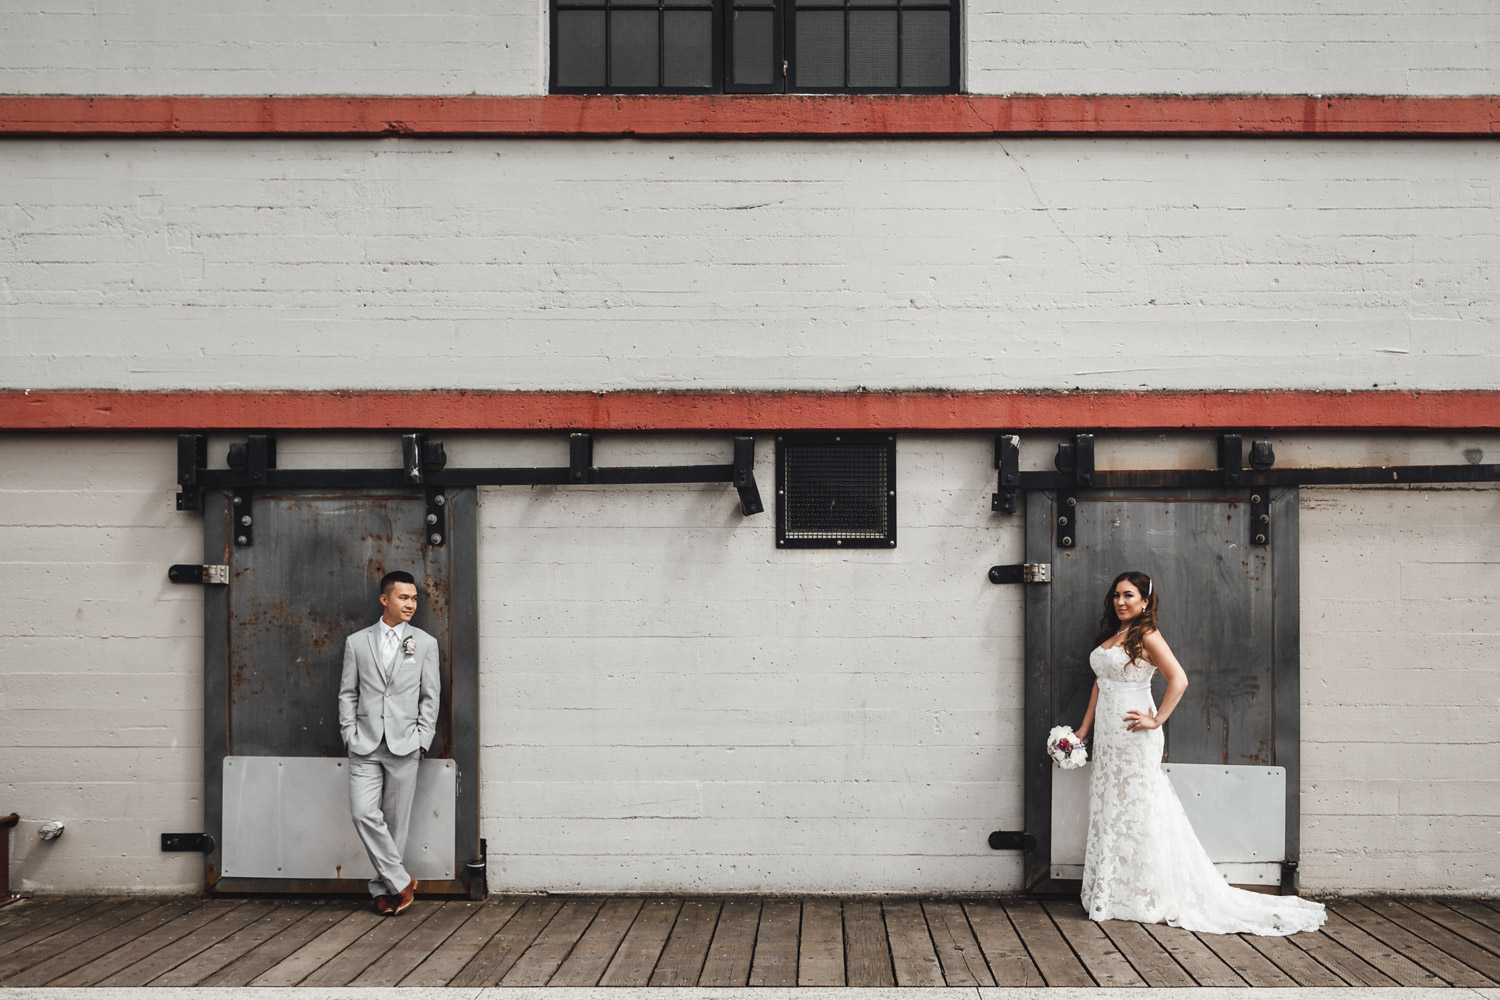 burrard dry dock pier wedding photography bride and groom in North Vancouver BC